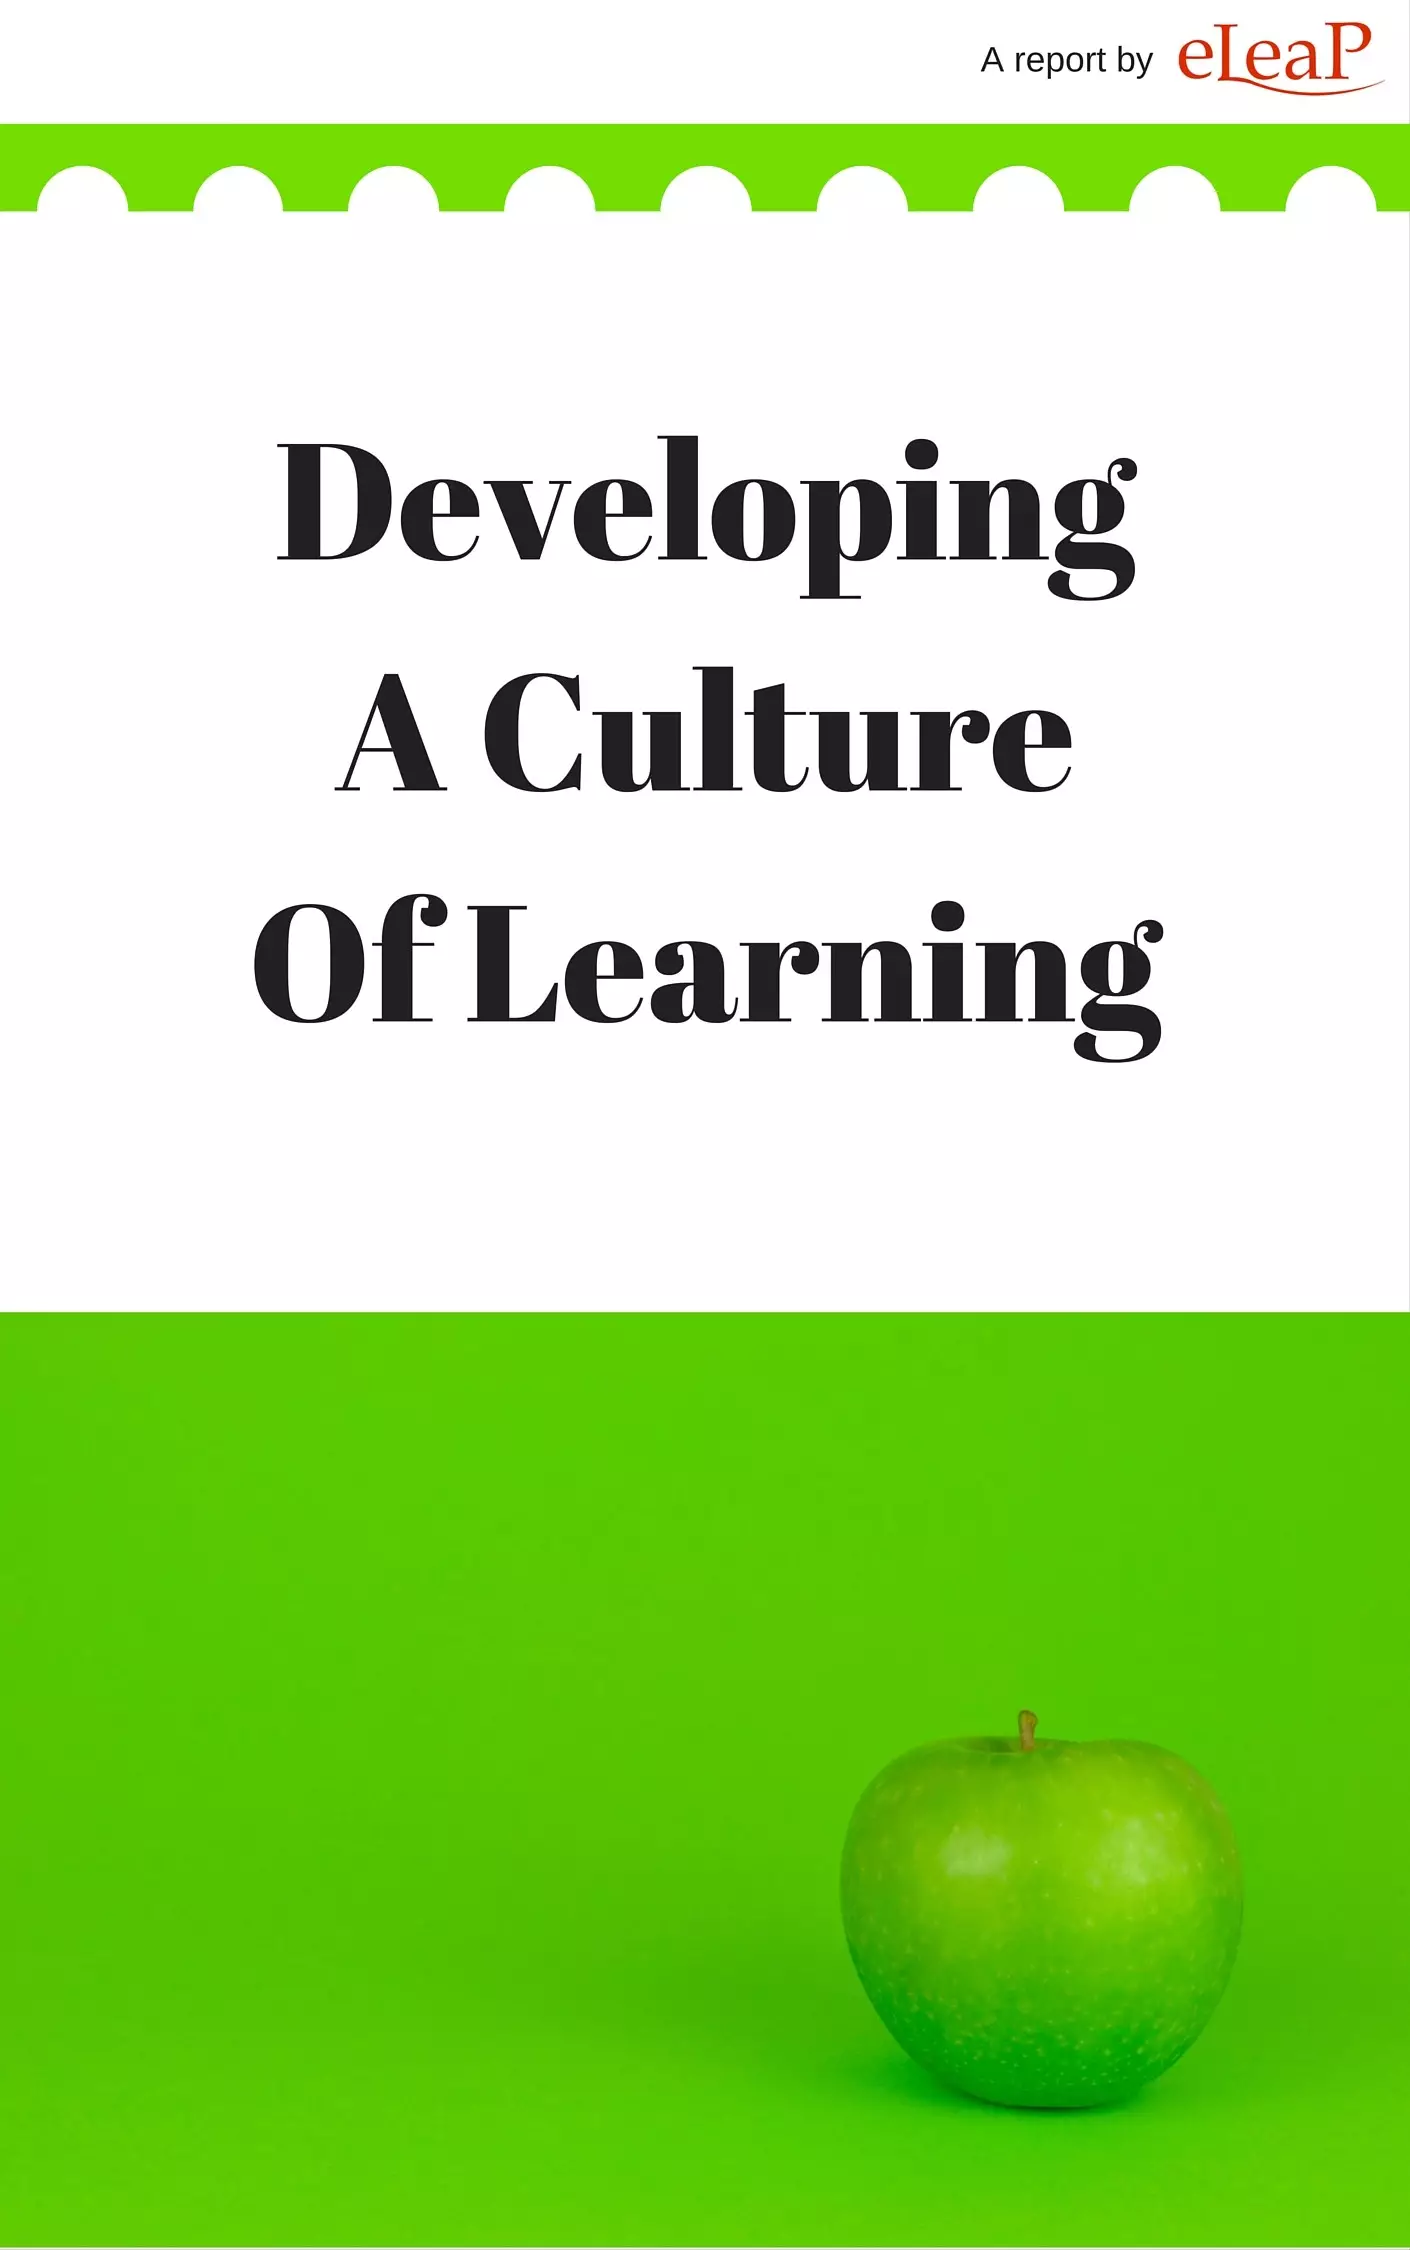 learning-culture